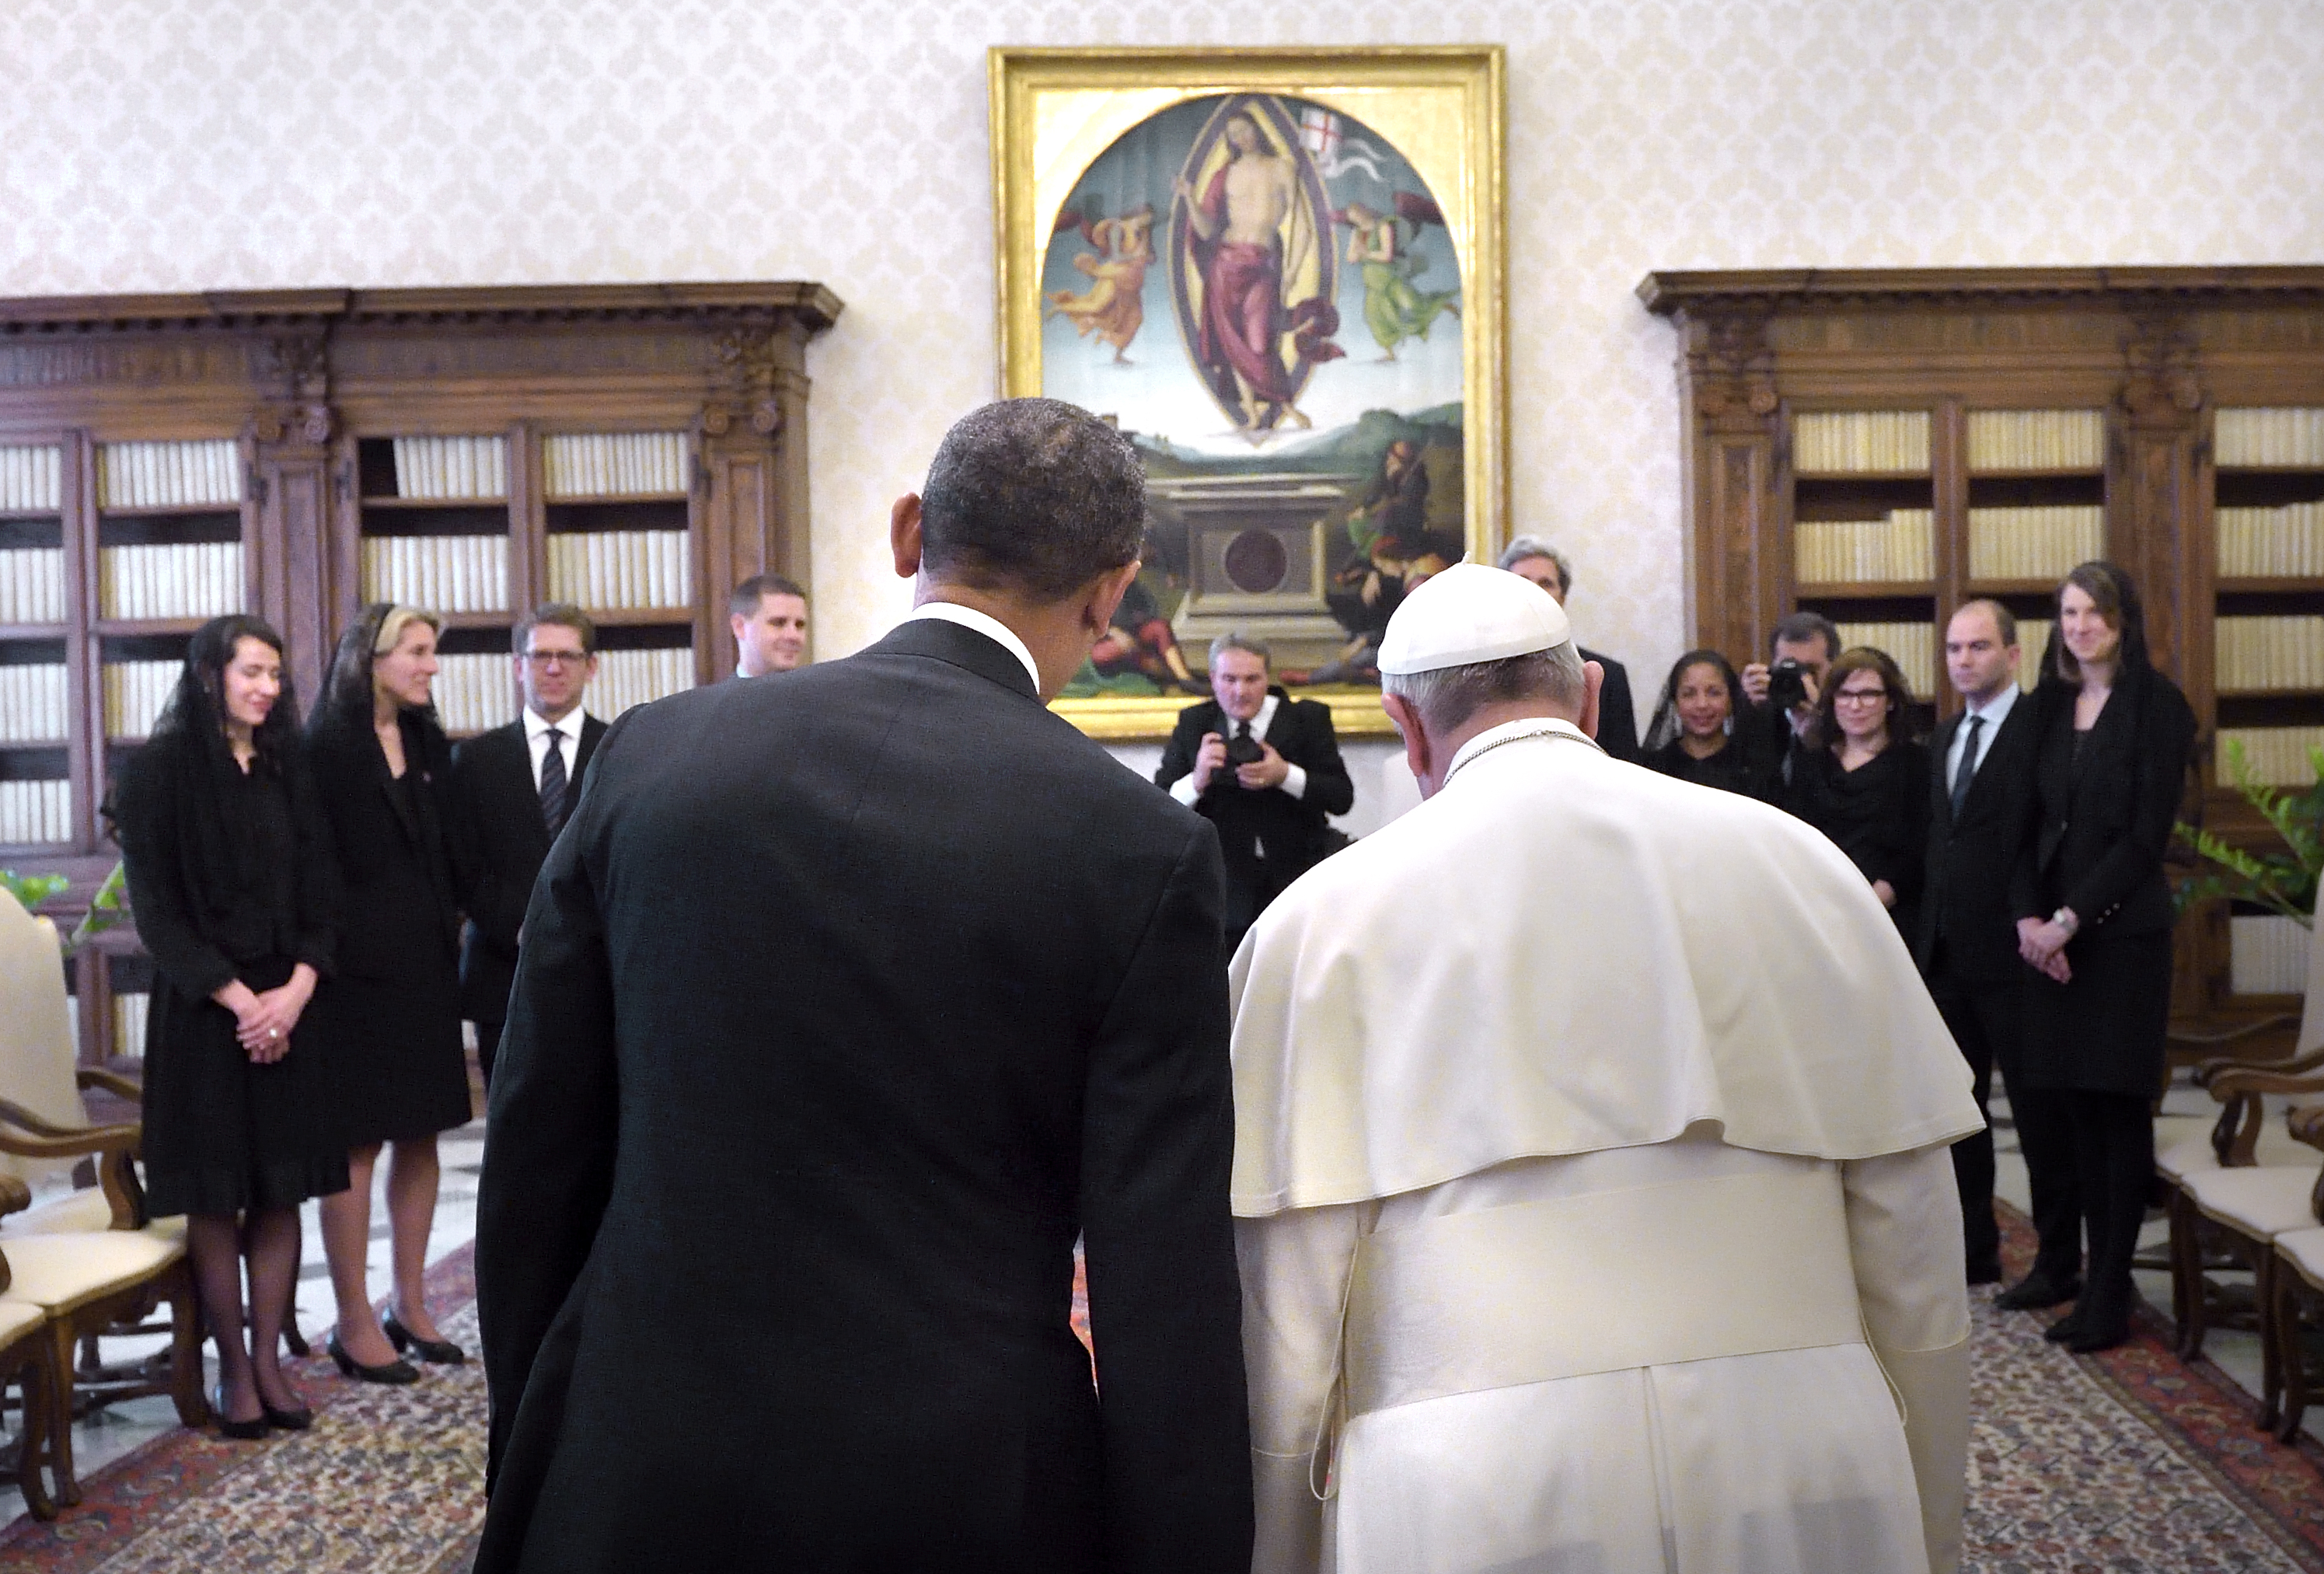 U.S. President Barack Obama speaks with Pope Francis during their meeting at the Vatican March 27, 2014. (Stefano Spaziani)